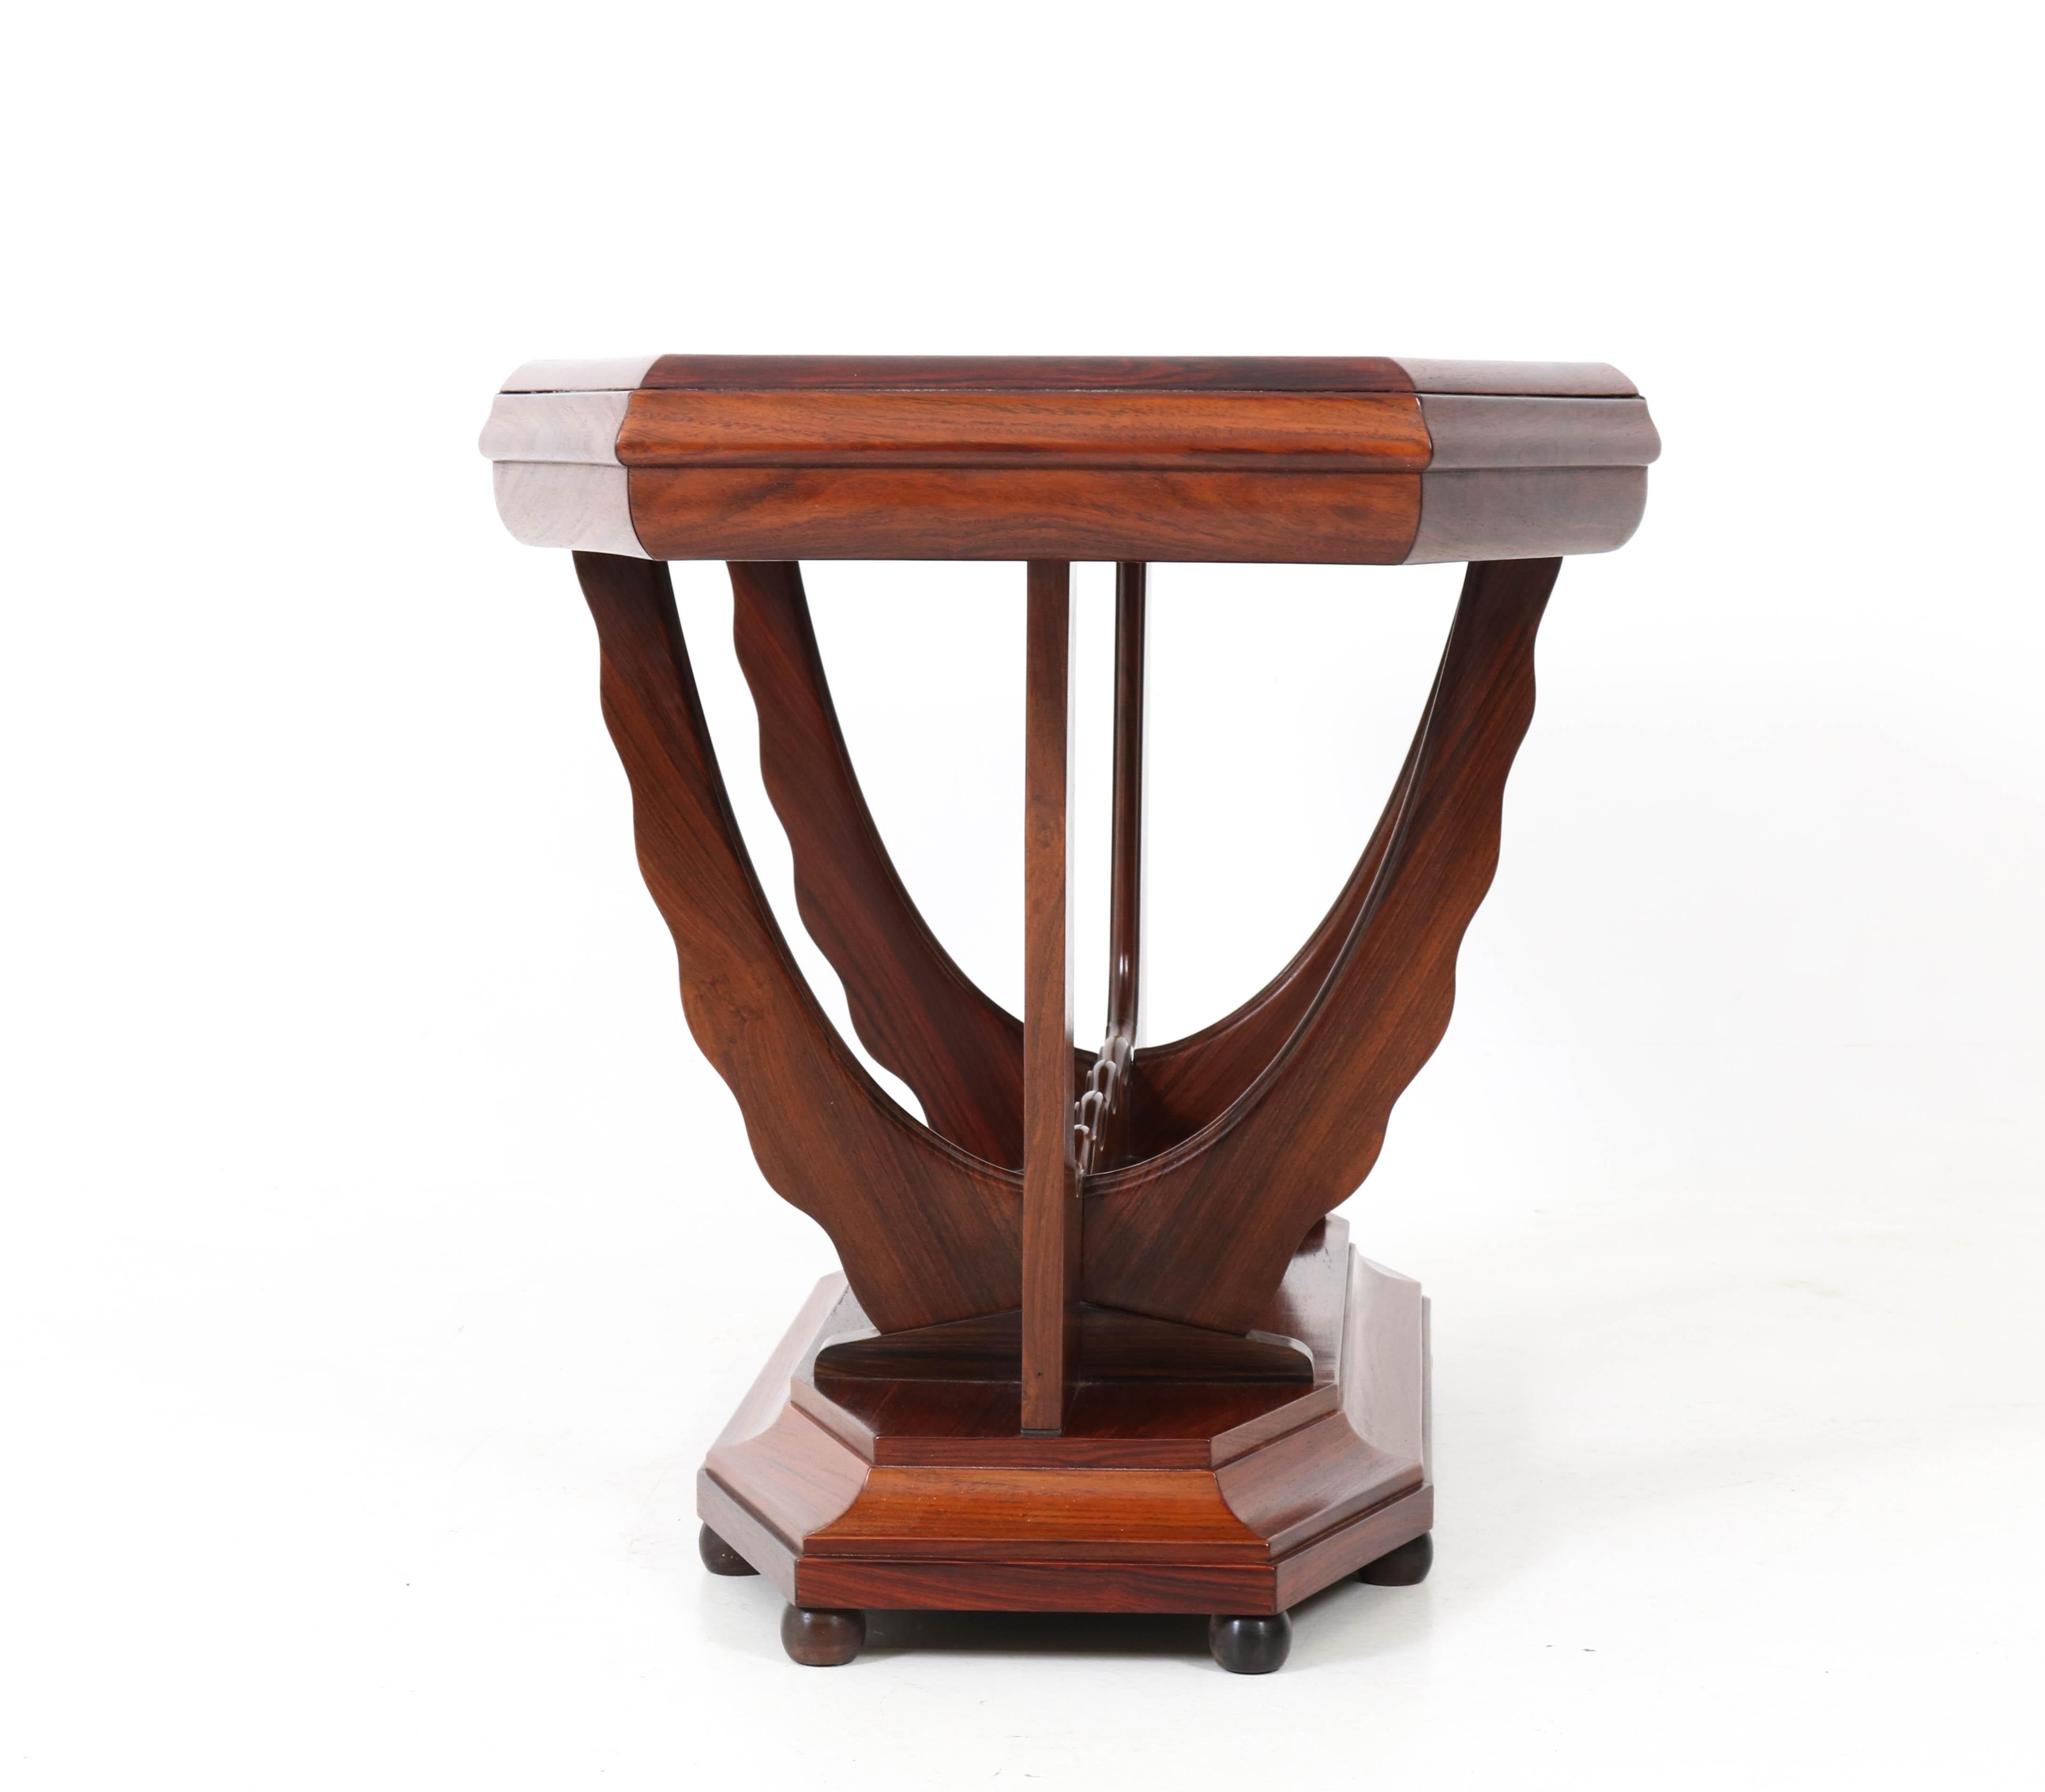 Rosewood Dutch Art Deco Amsterdam School Side Table by Max Coini, 1920s 1